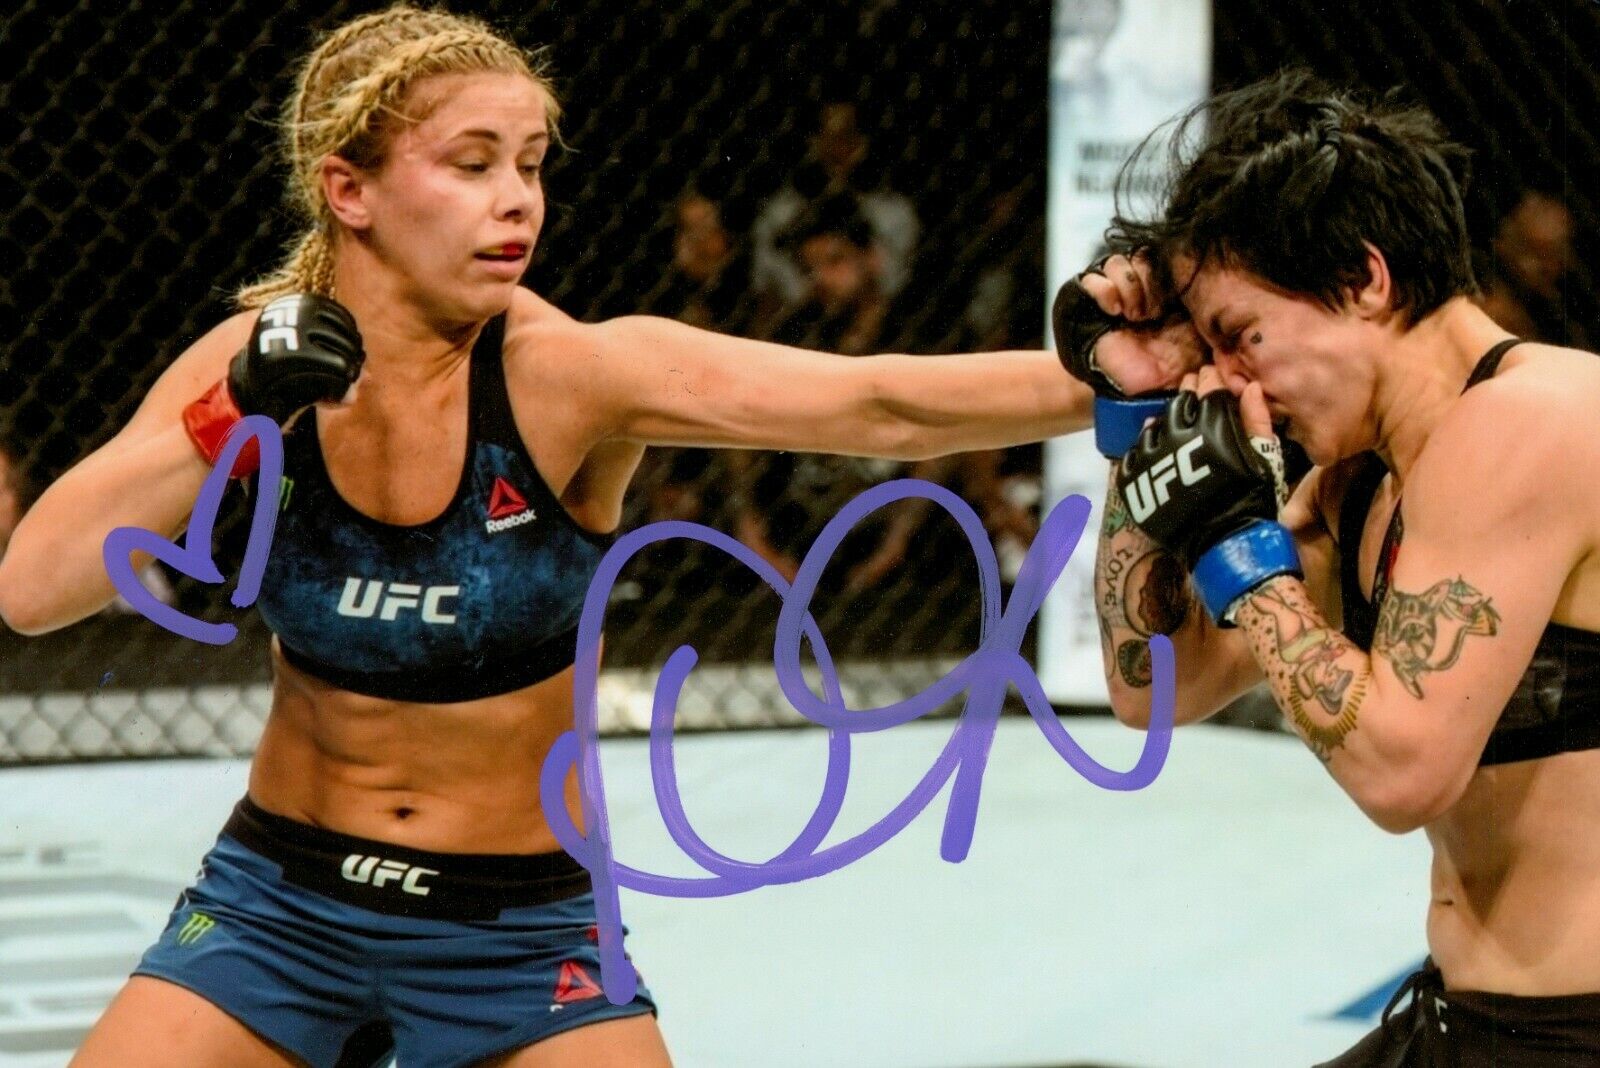 Paige VanZant Signed 6x4 Photo Poster painting UFC MMA Fighter Octagon Flyweight Autograph + COA